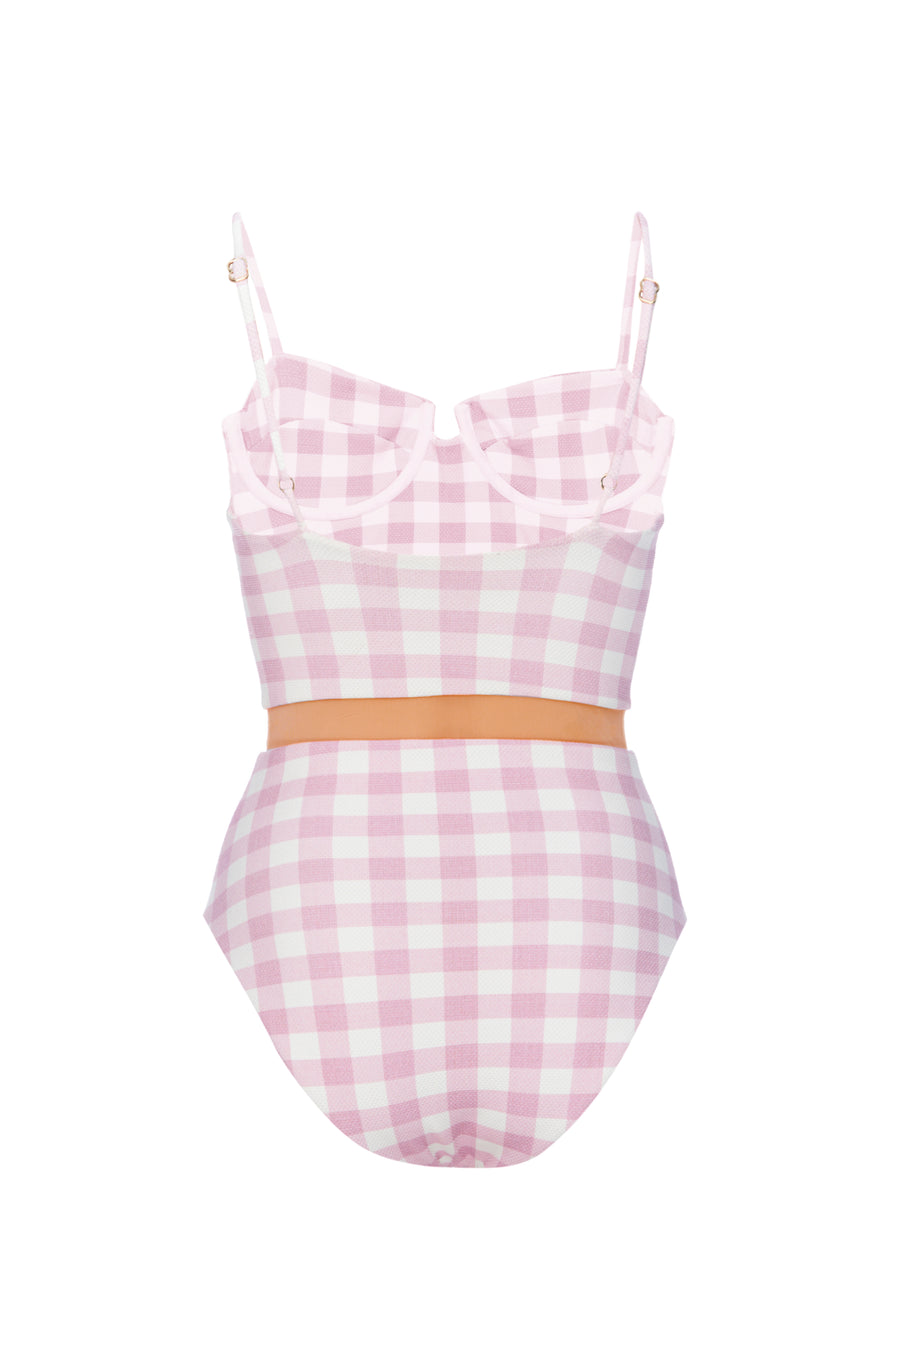 The Kaity - Pink Gingham